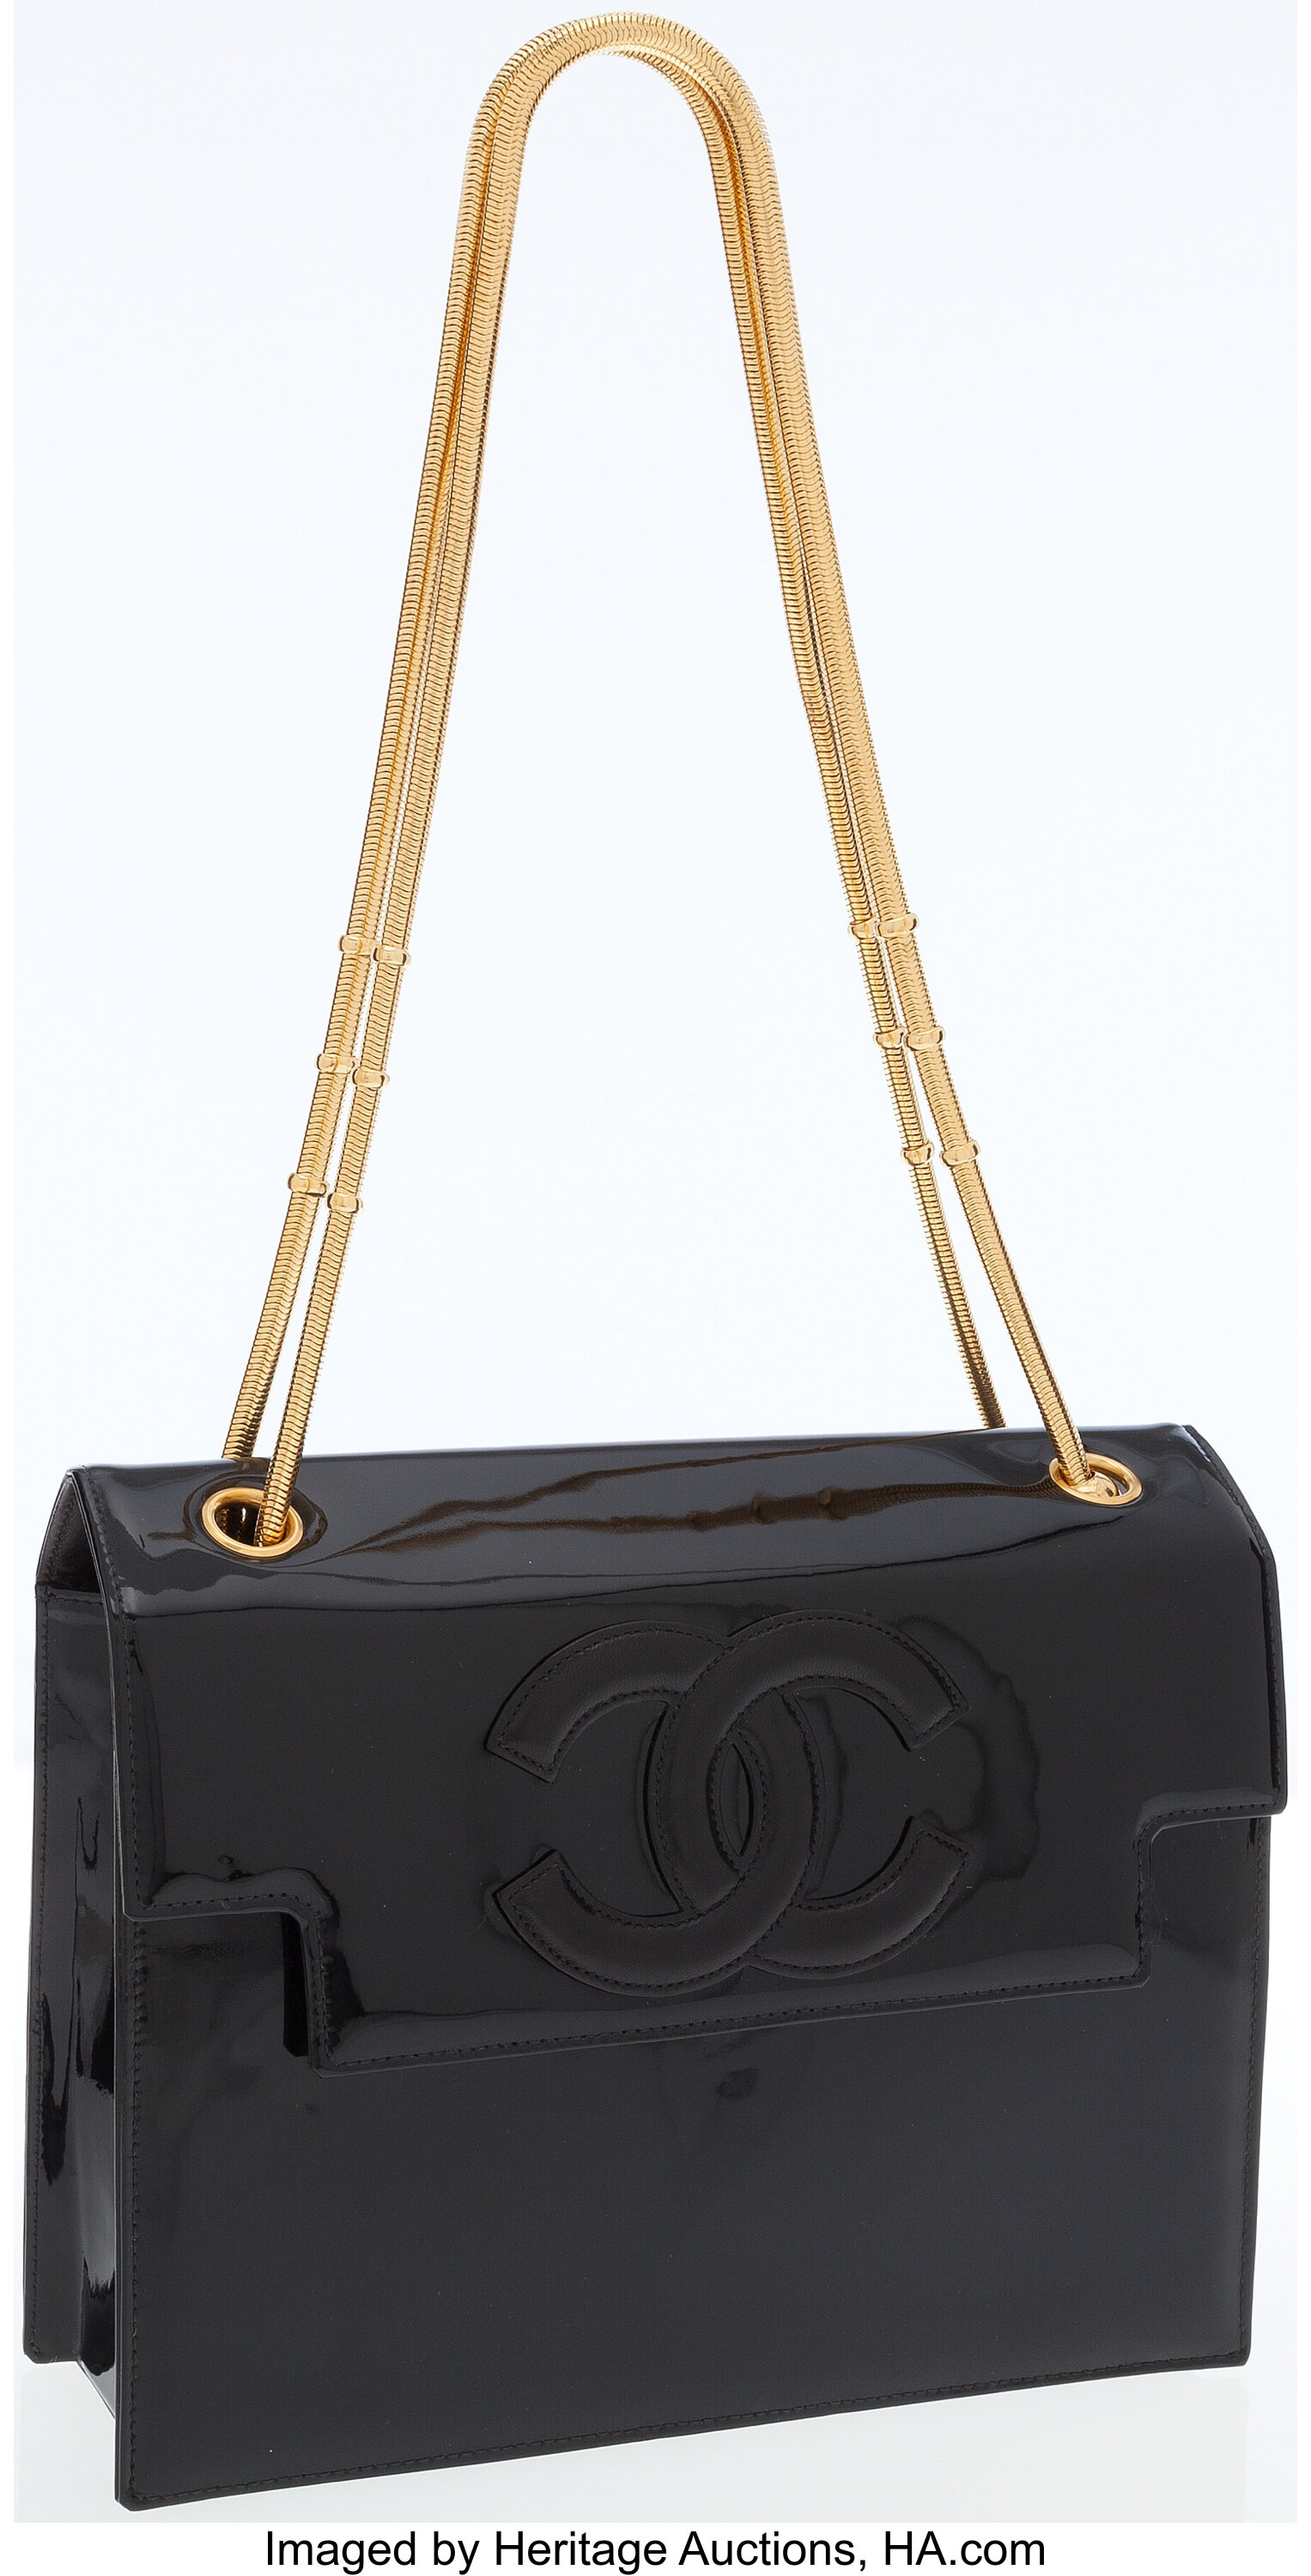 chanel bag black with gold chain